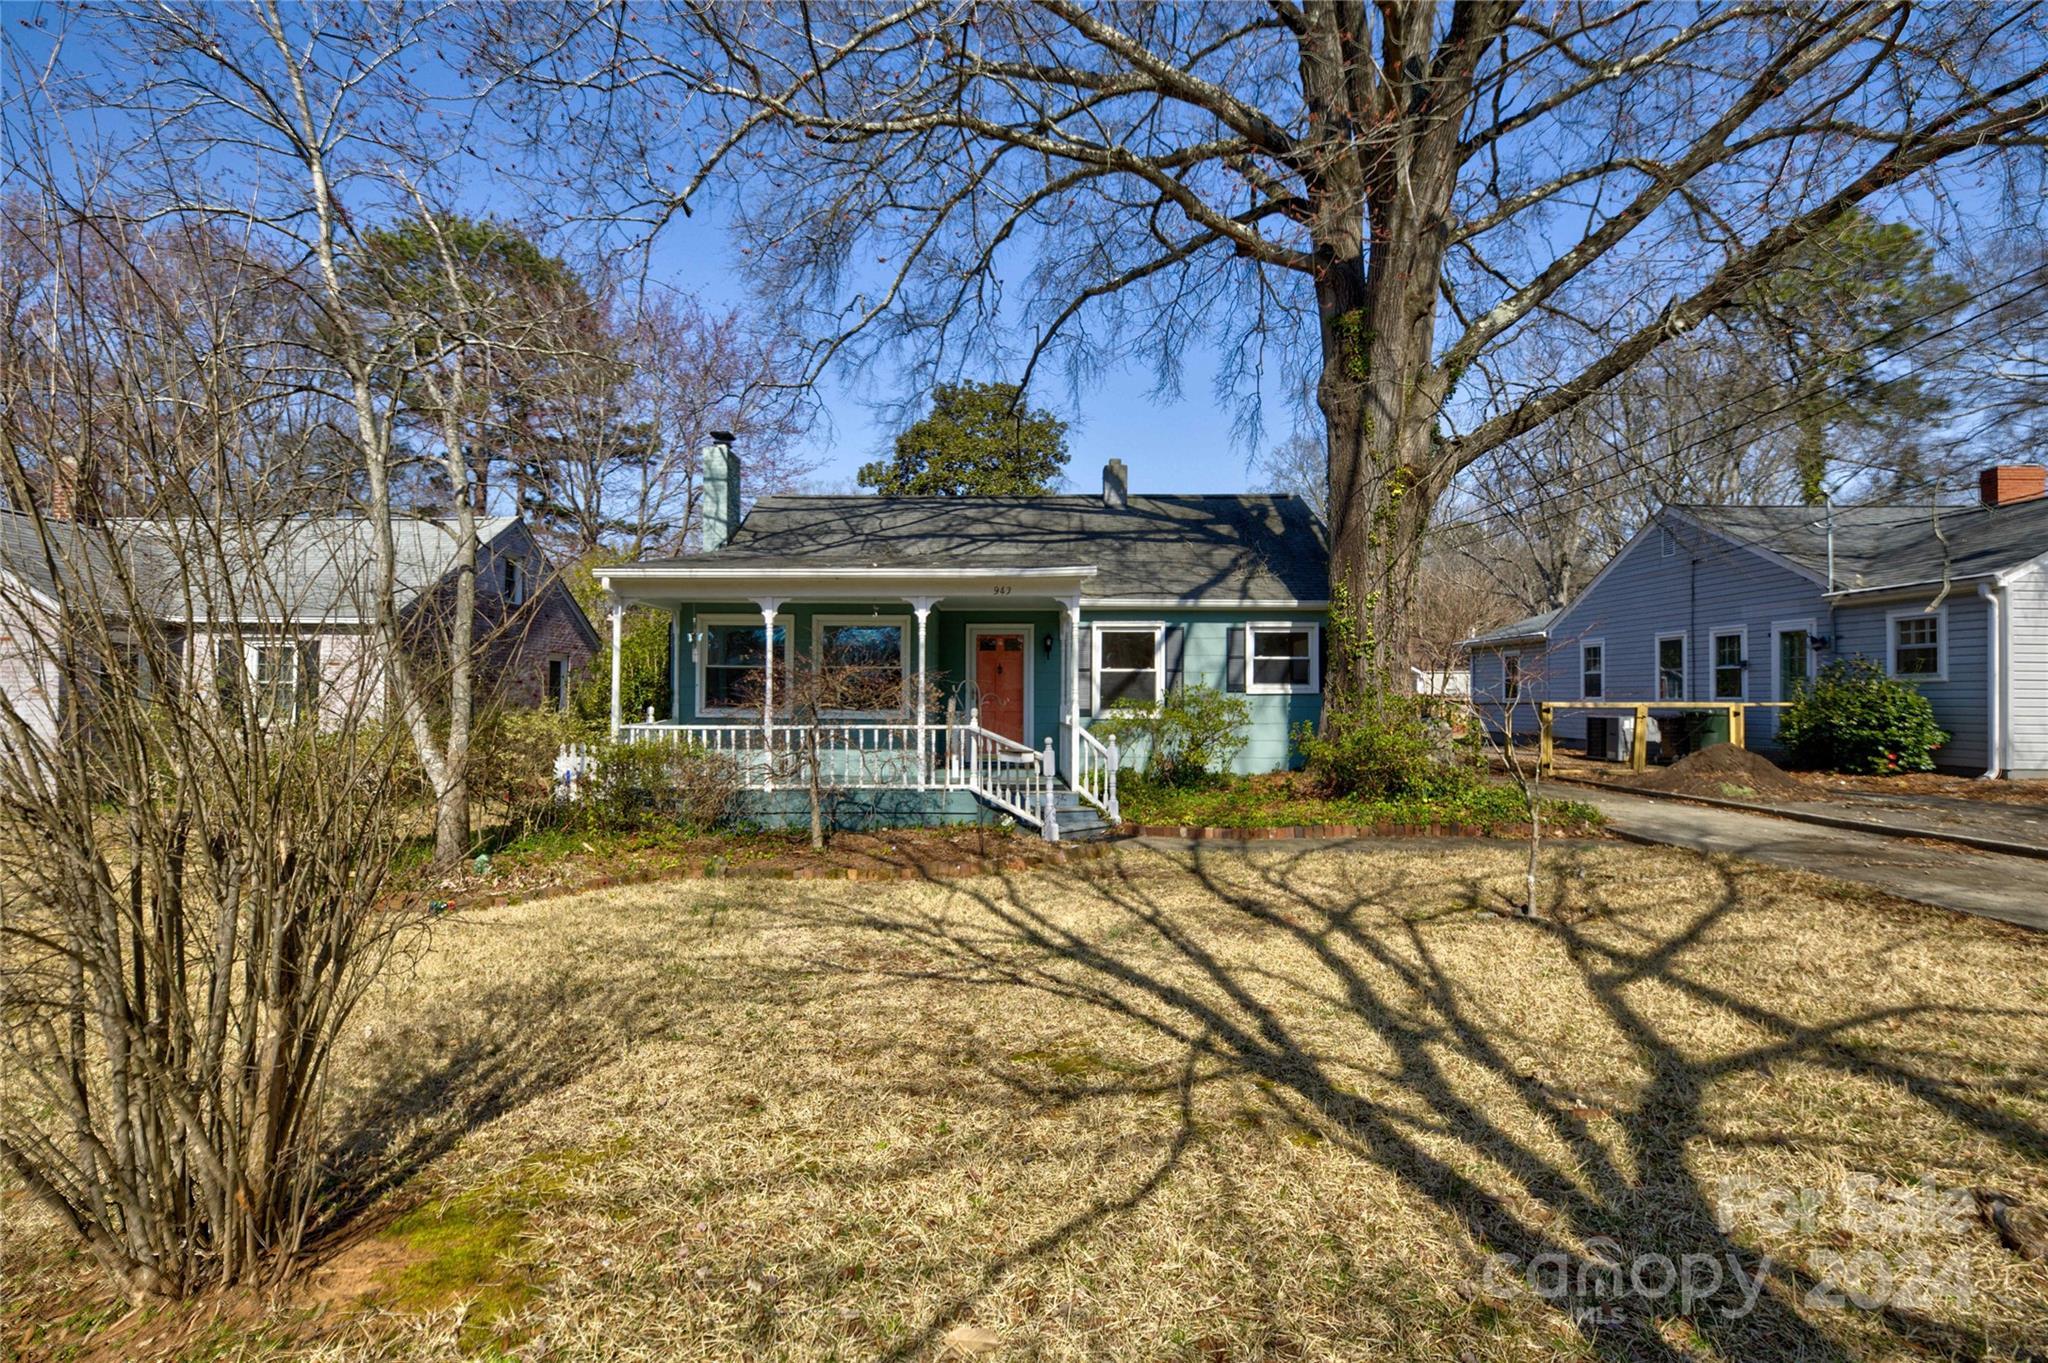 Photo one of 943 Beverly Dr Rock Hill SC 29730 | MLS 4112383